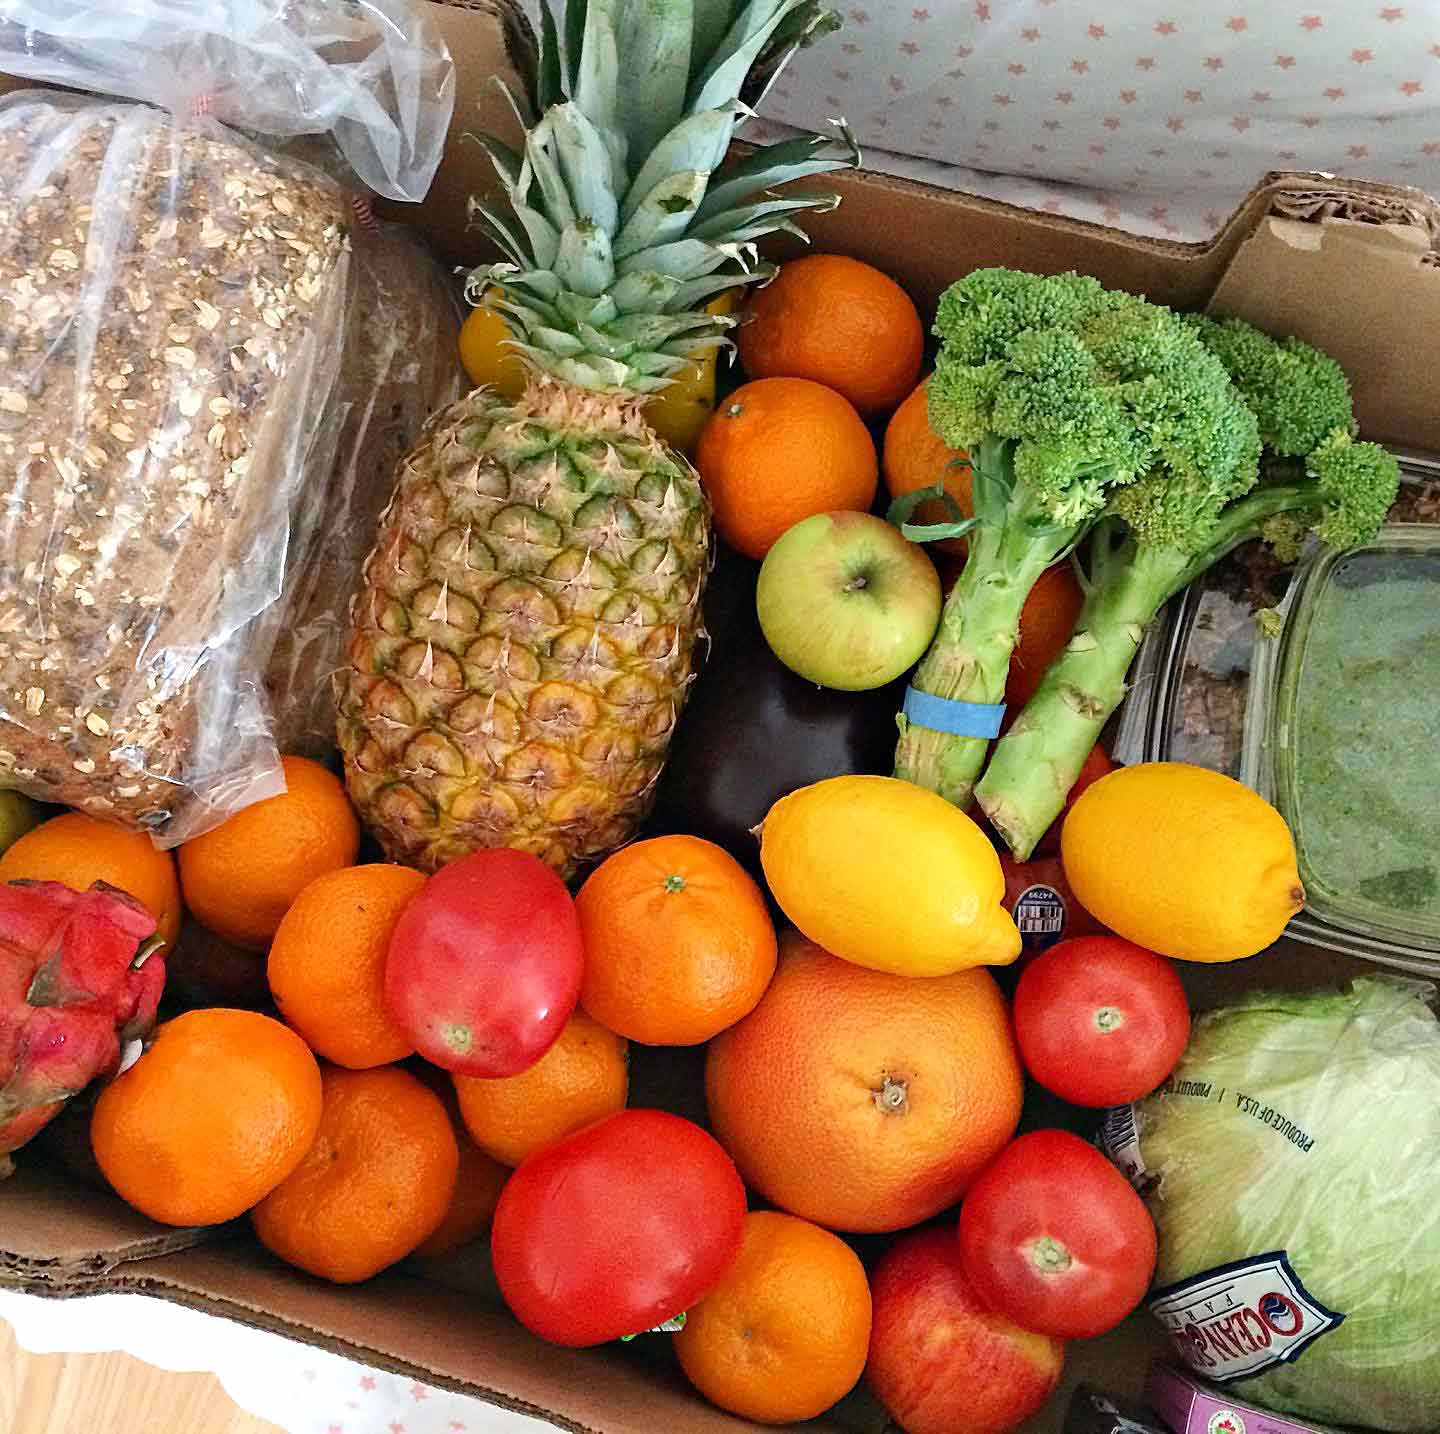 A box full of fresh produce, whole grain bread, and other vegan pantry items awaits delivery